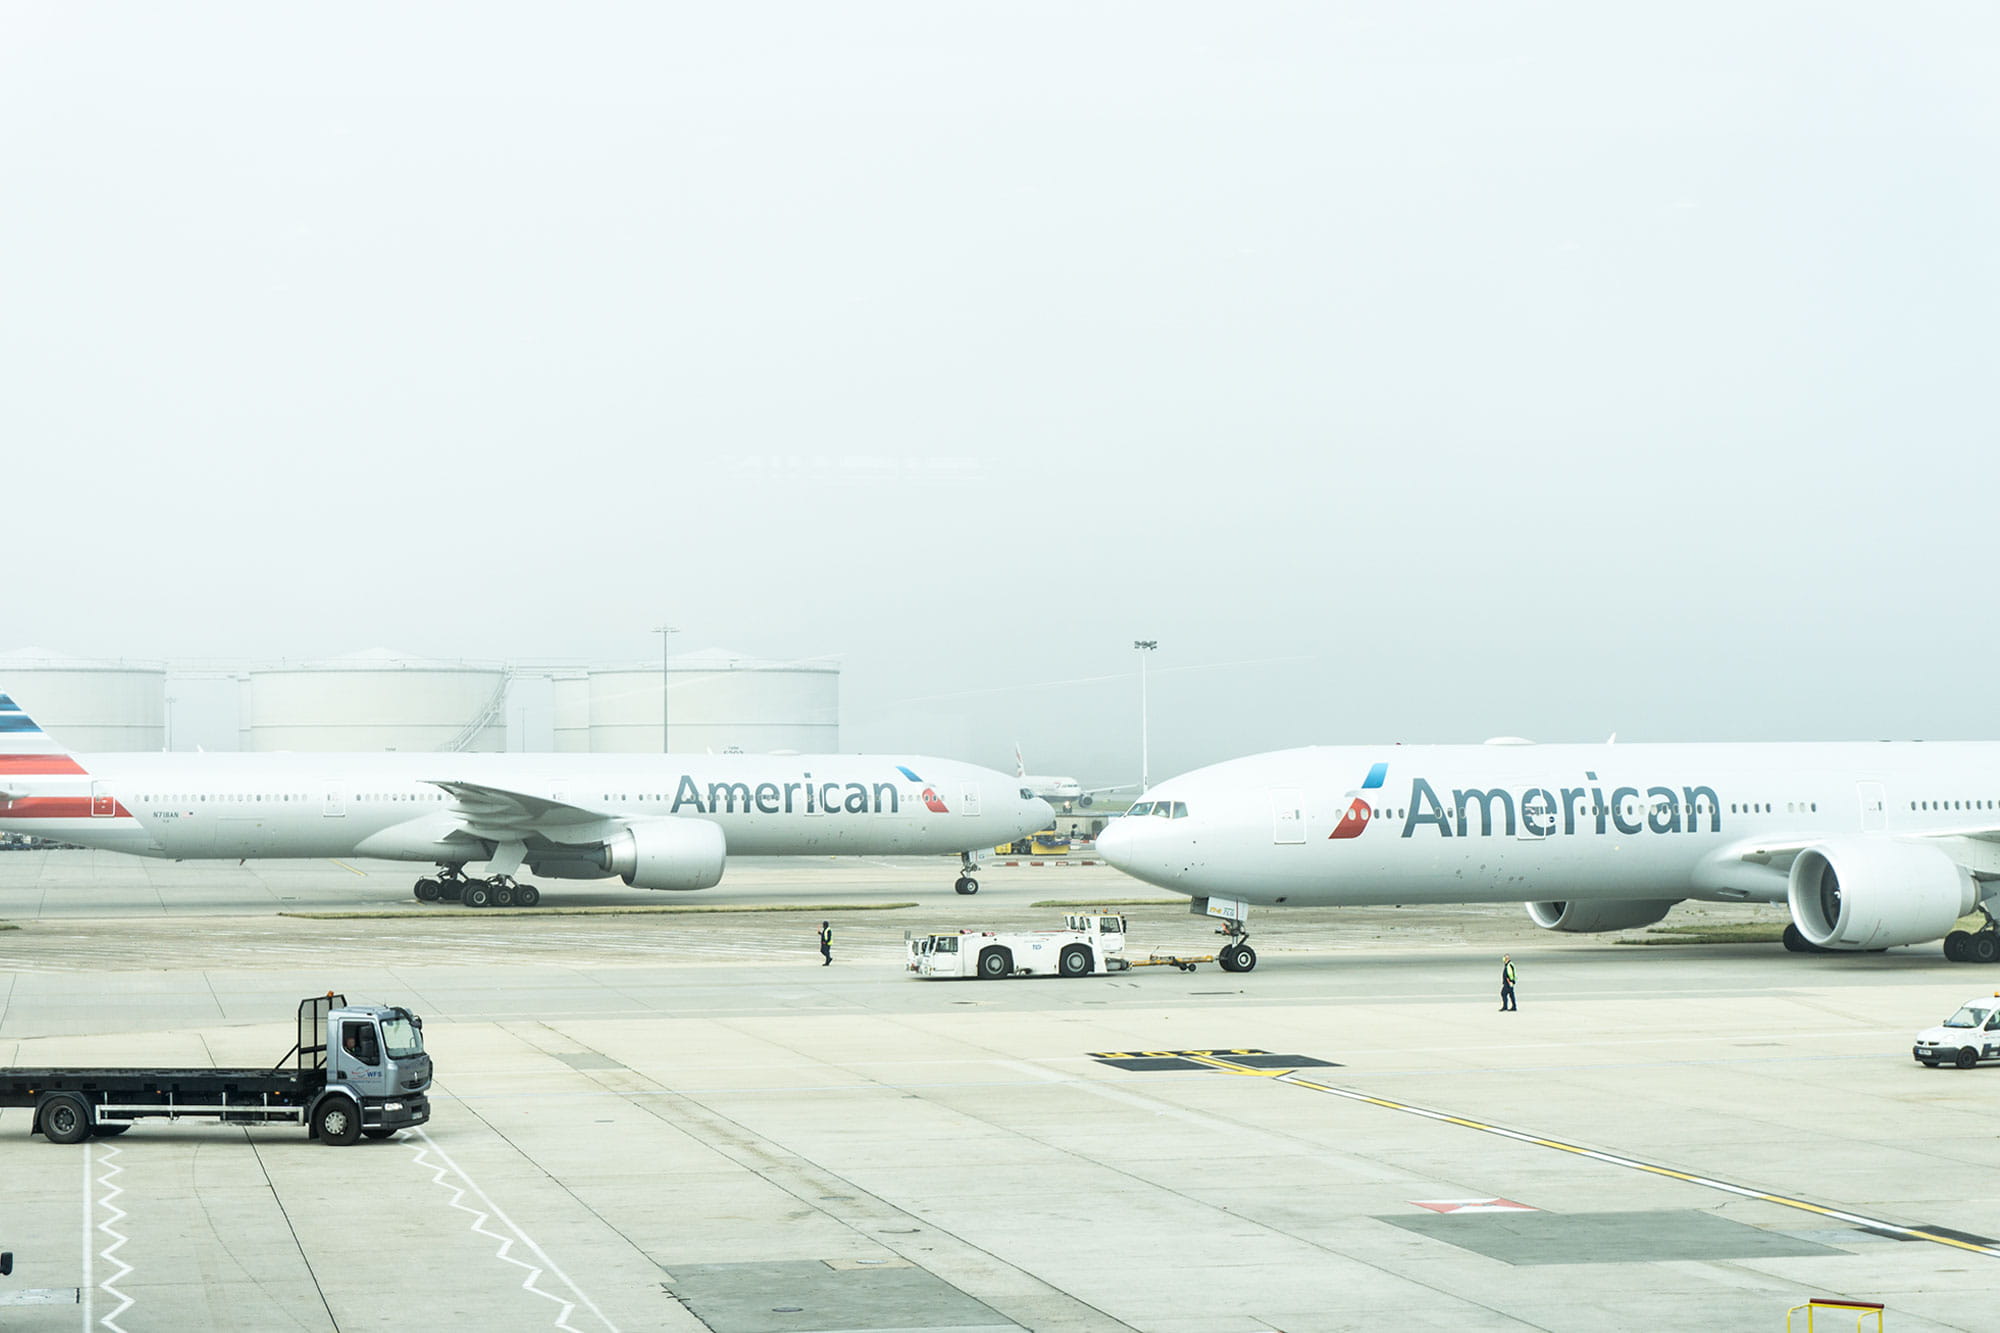 two American Airlines planes on airport, two American airliner on airport